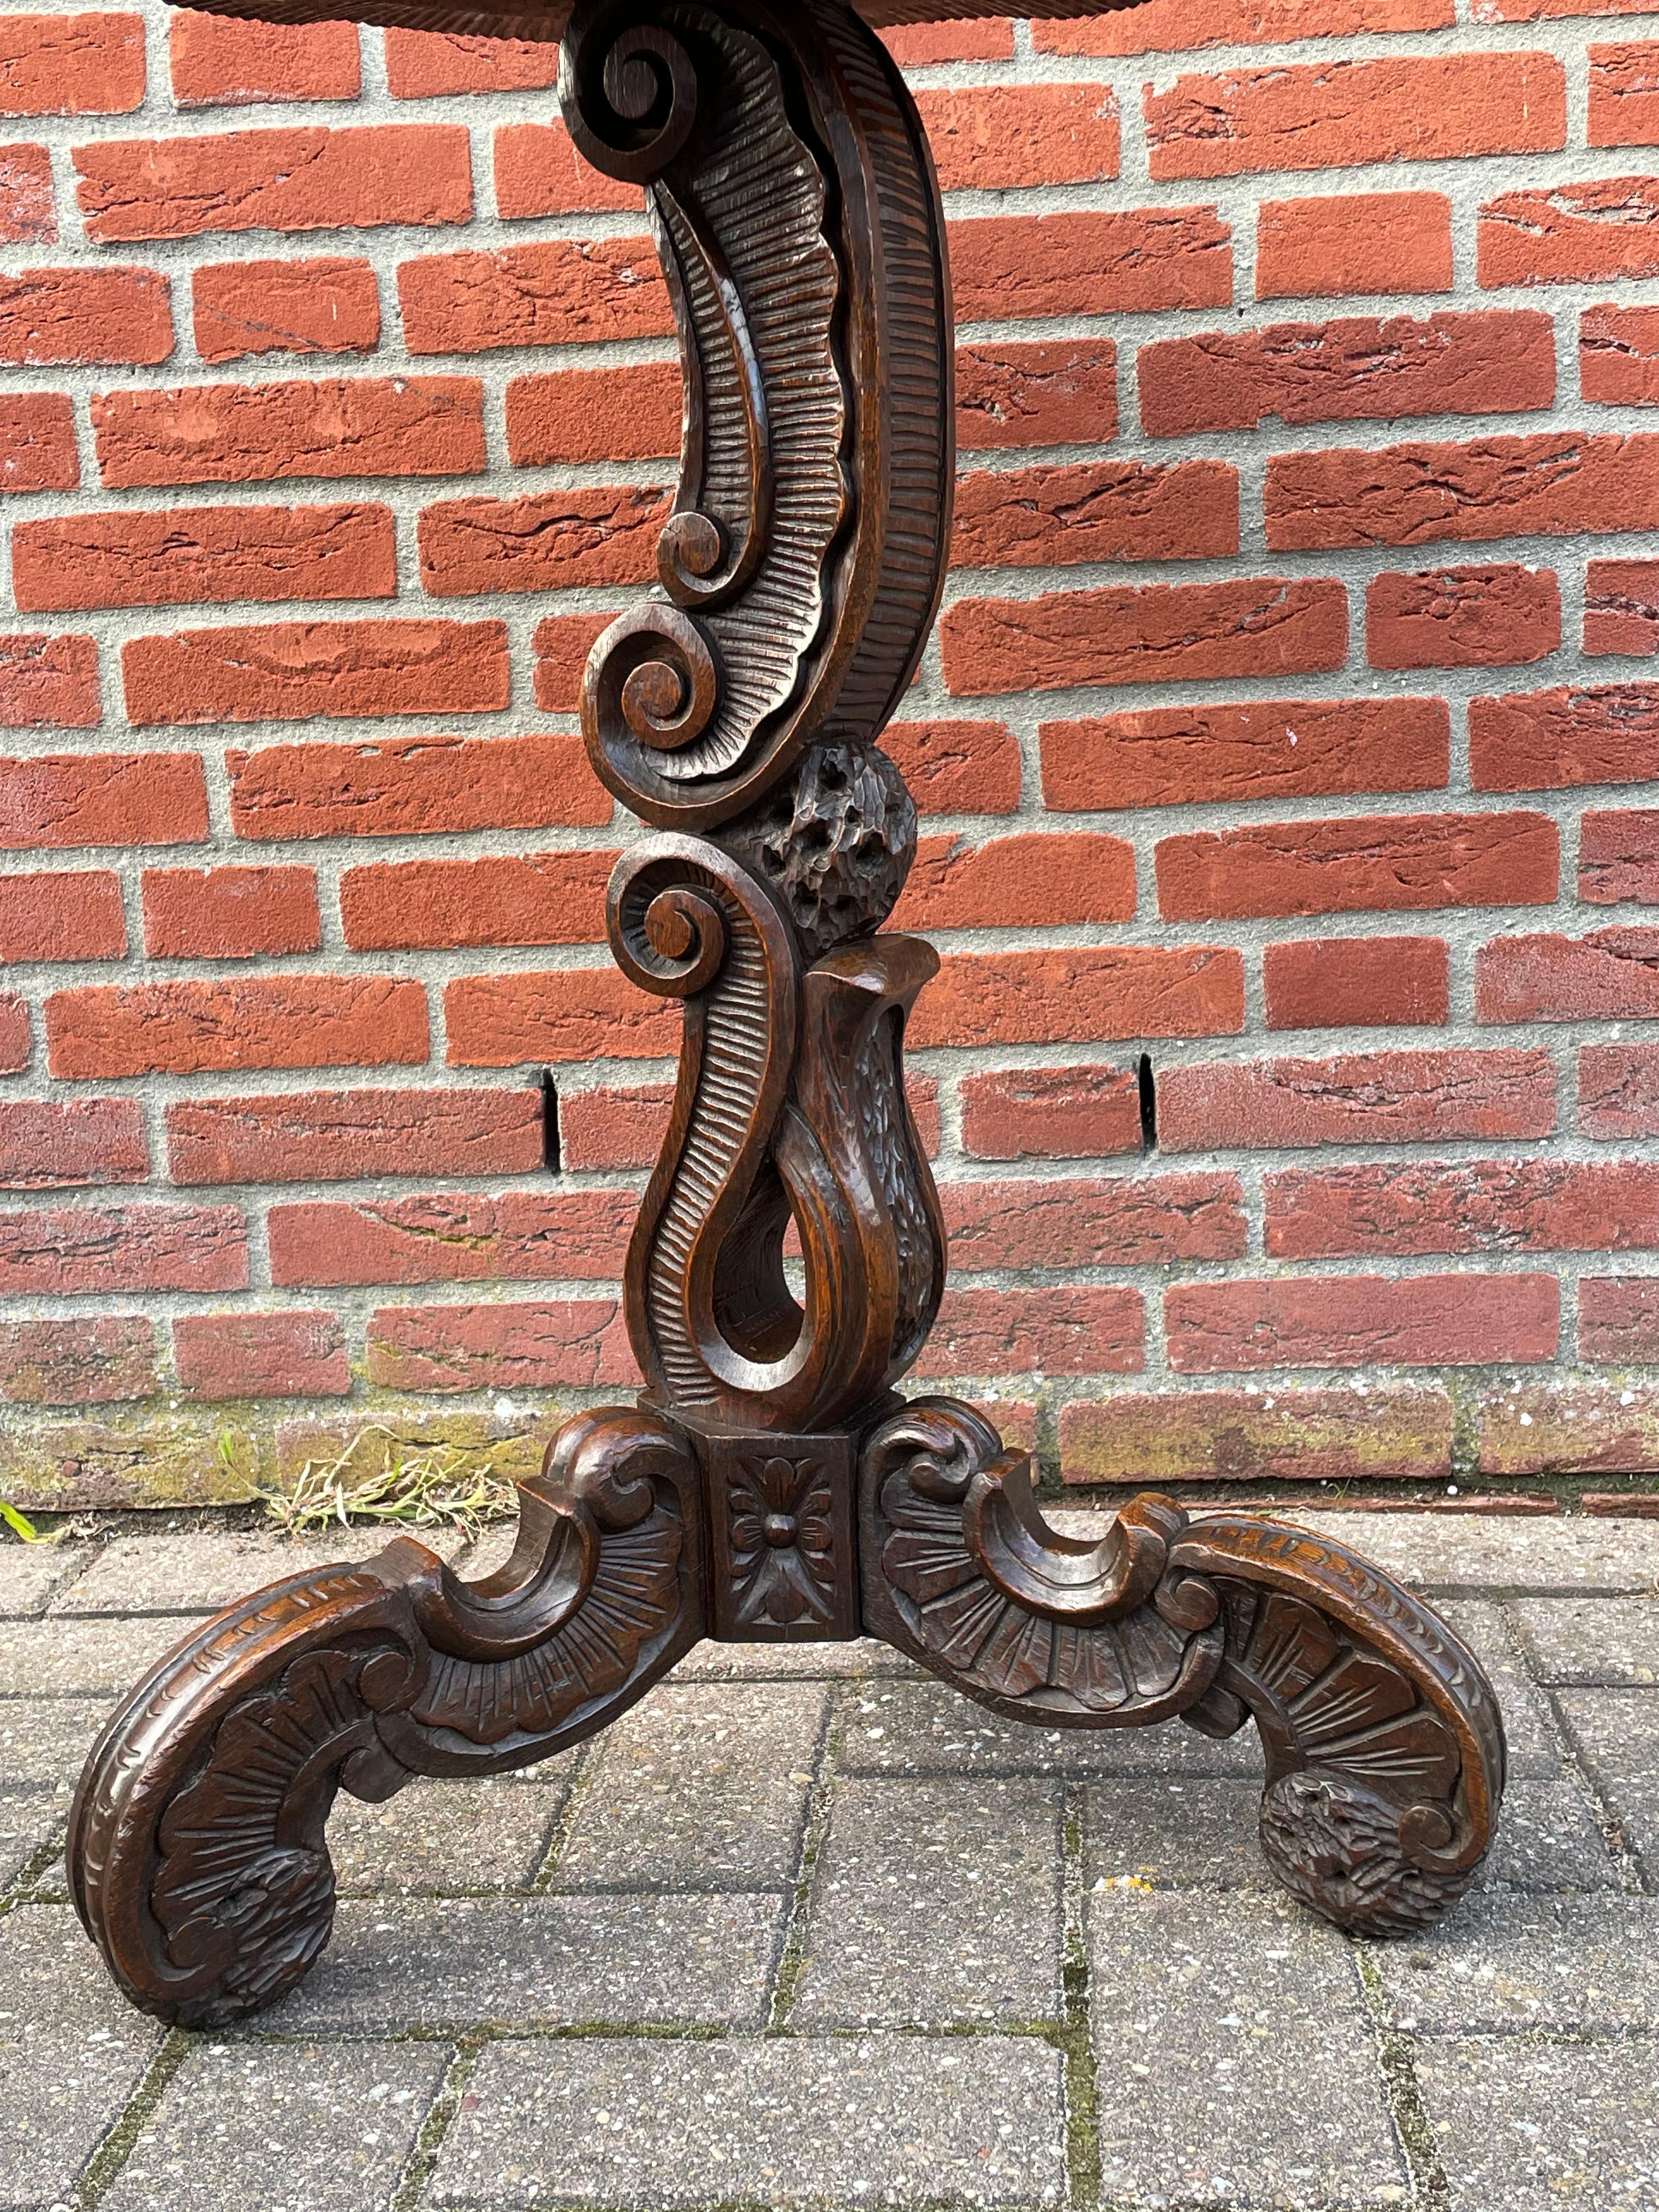 Stunning Antique Torchere or Gueridon Table w. Hand Carved Rococo Shell Motifs For Sale 1